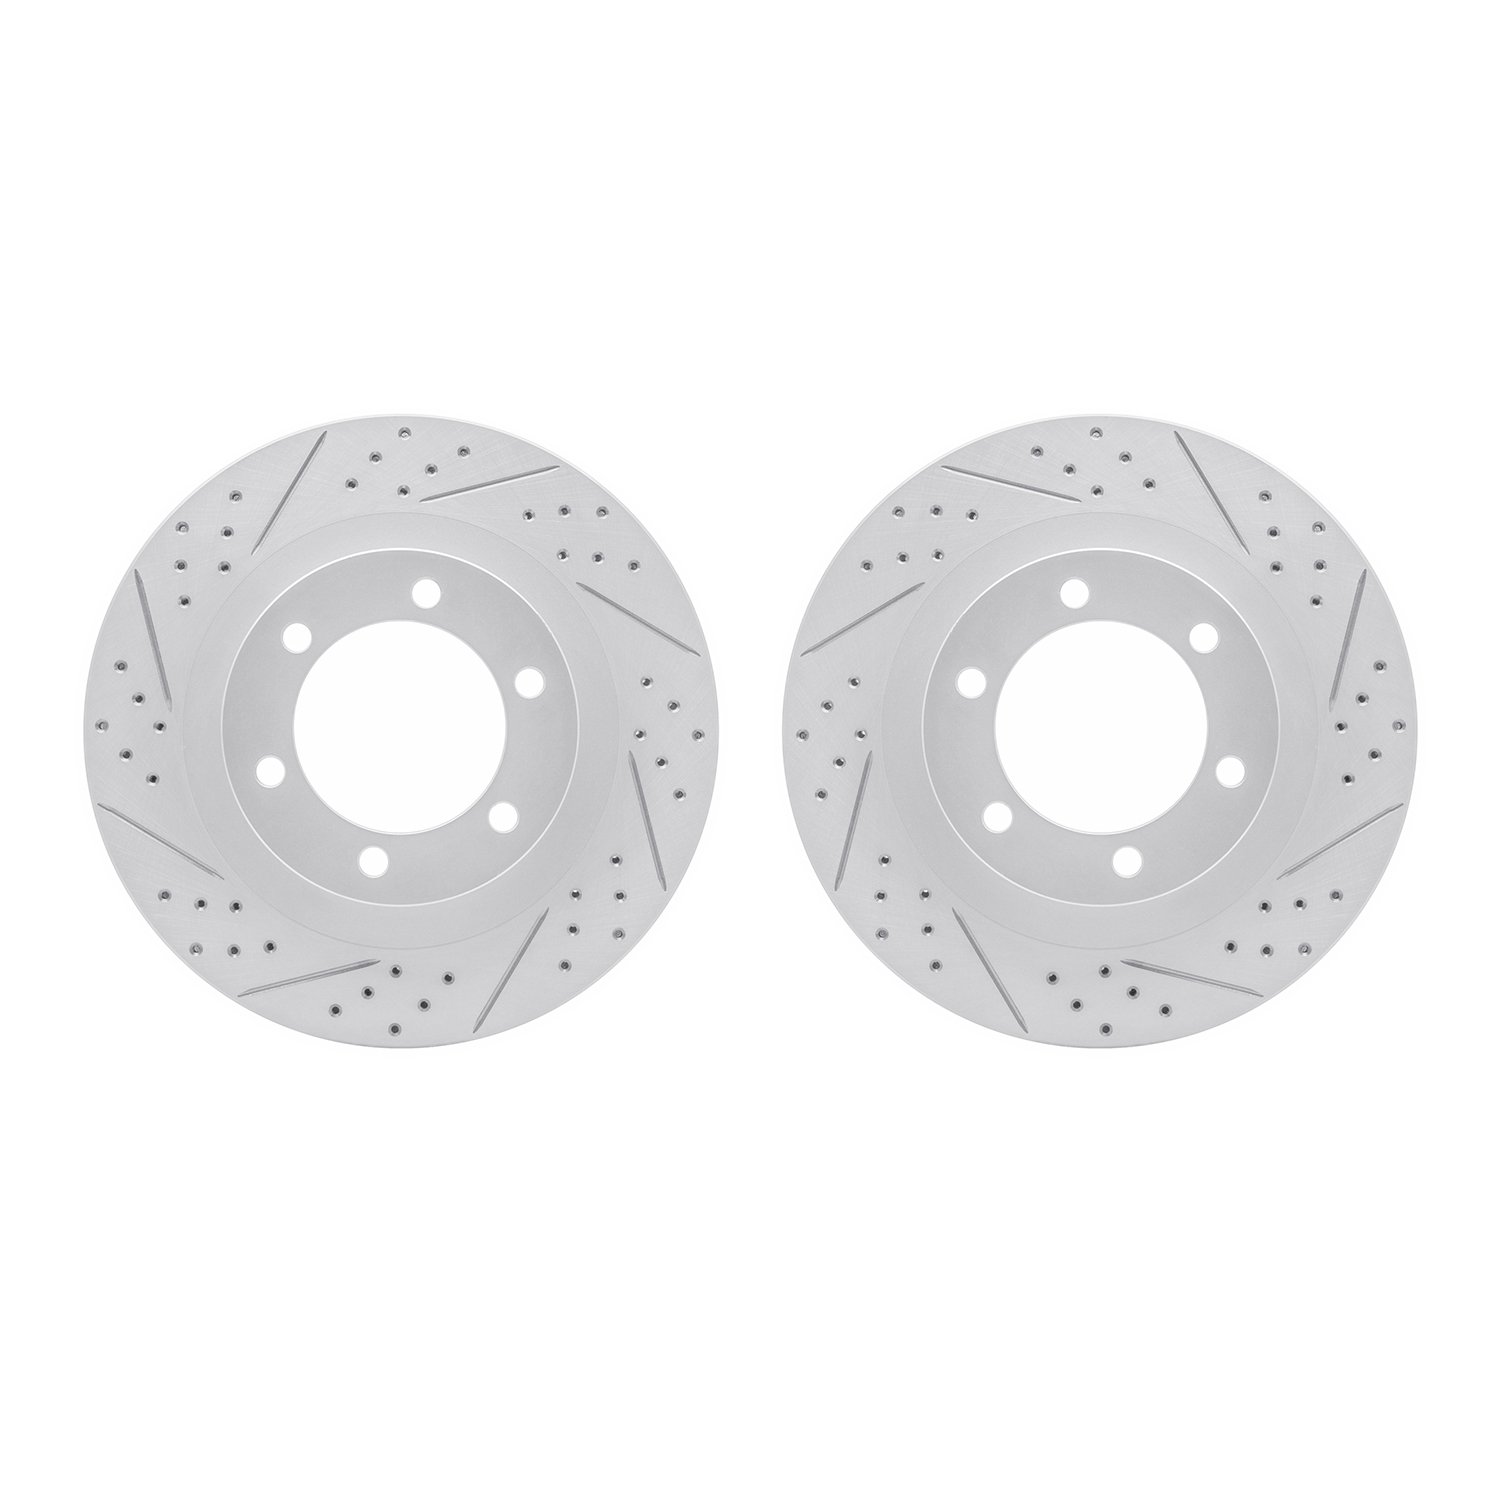 2002-76008 Geoperformance Drilled/Slotted Brake Rotors, 2003-2009 Lexus/Toyota/Scion, Position: Front